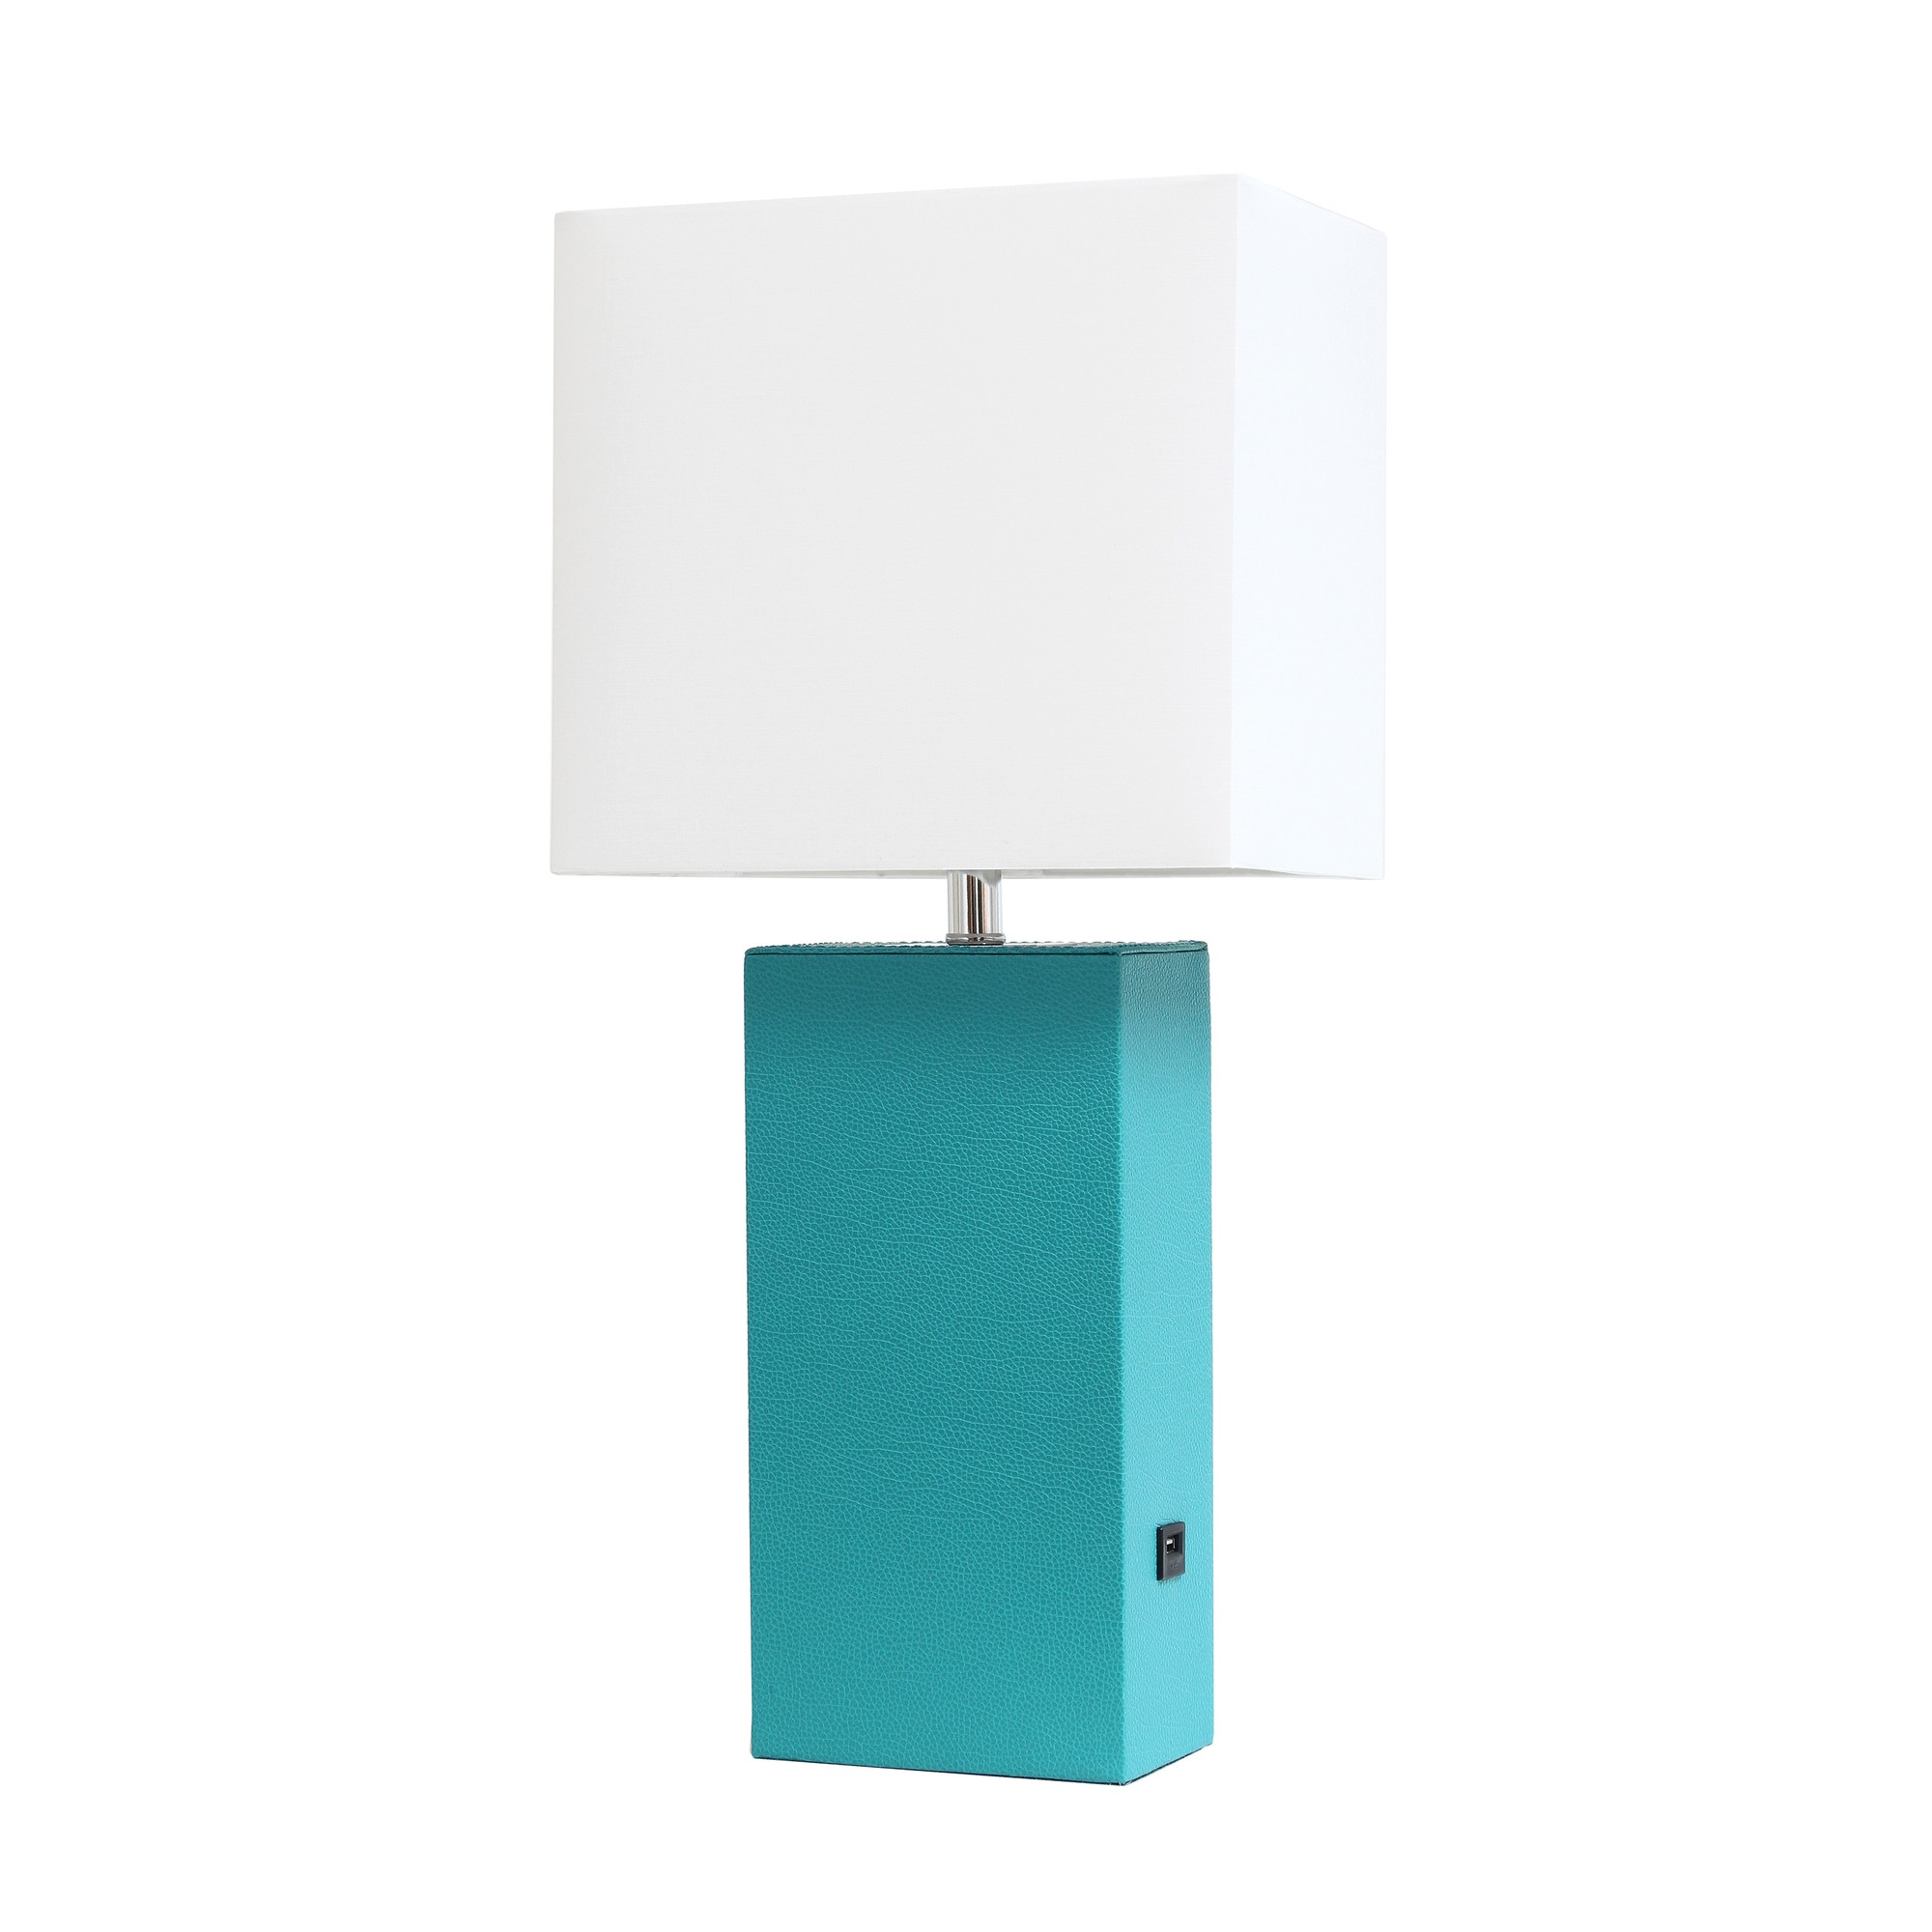 21in Table Lamp USB Charg Port White Shade Teal